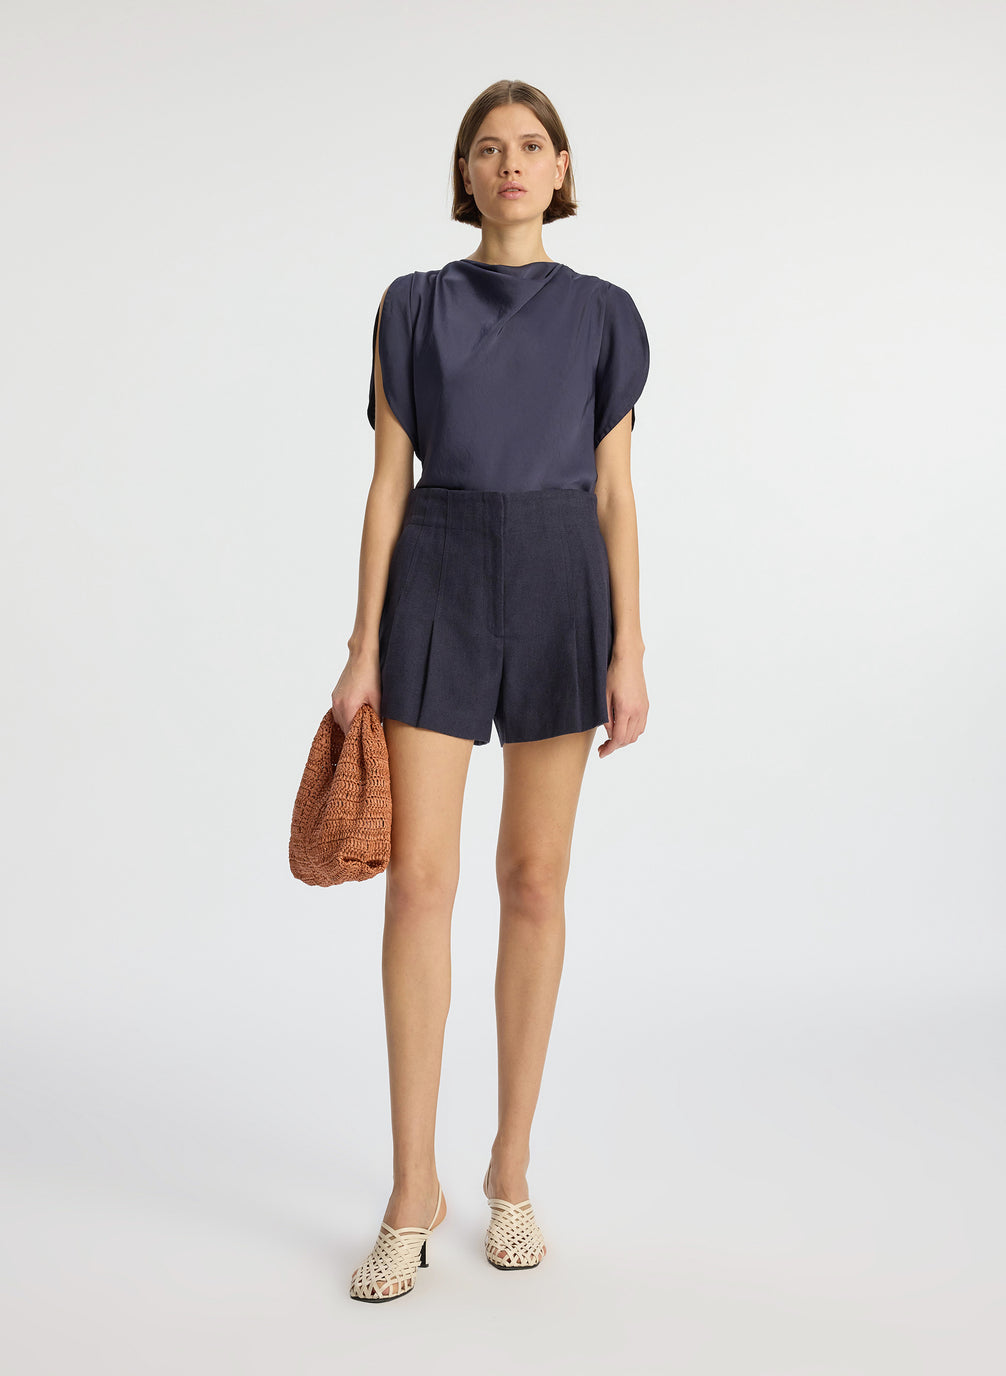 front view of woman wearing navy blue short sleeve satin blouse and navy blue shorts